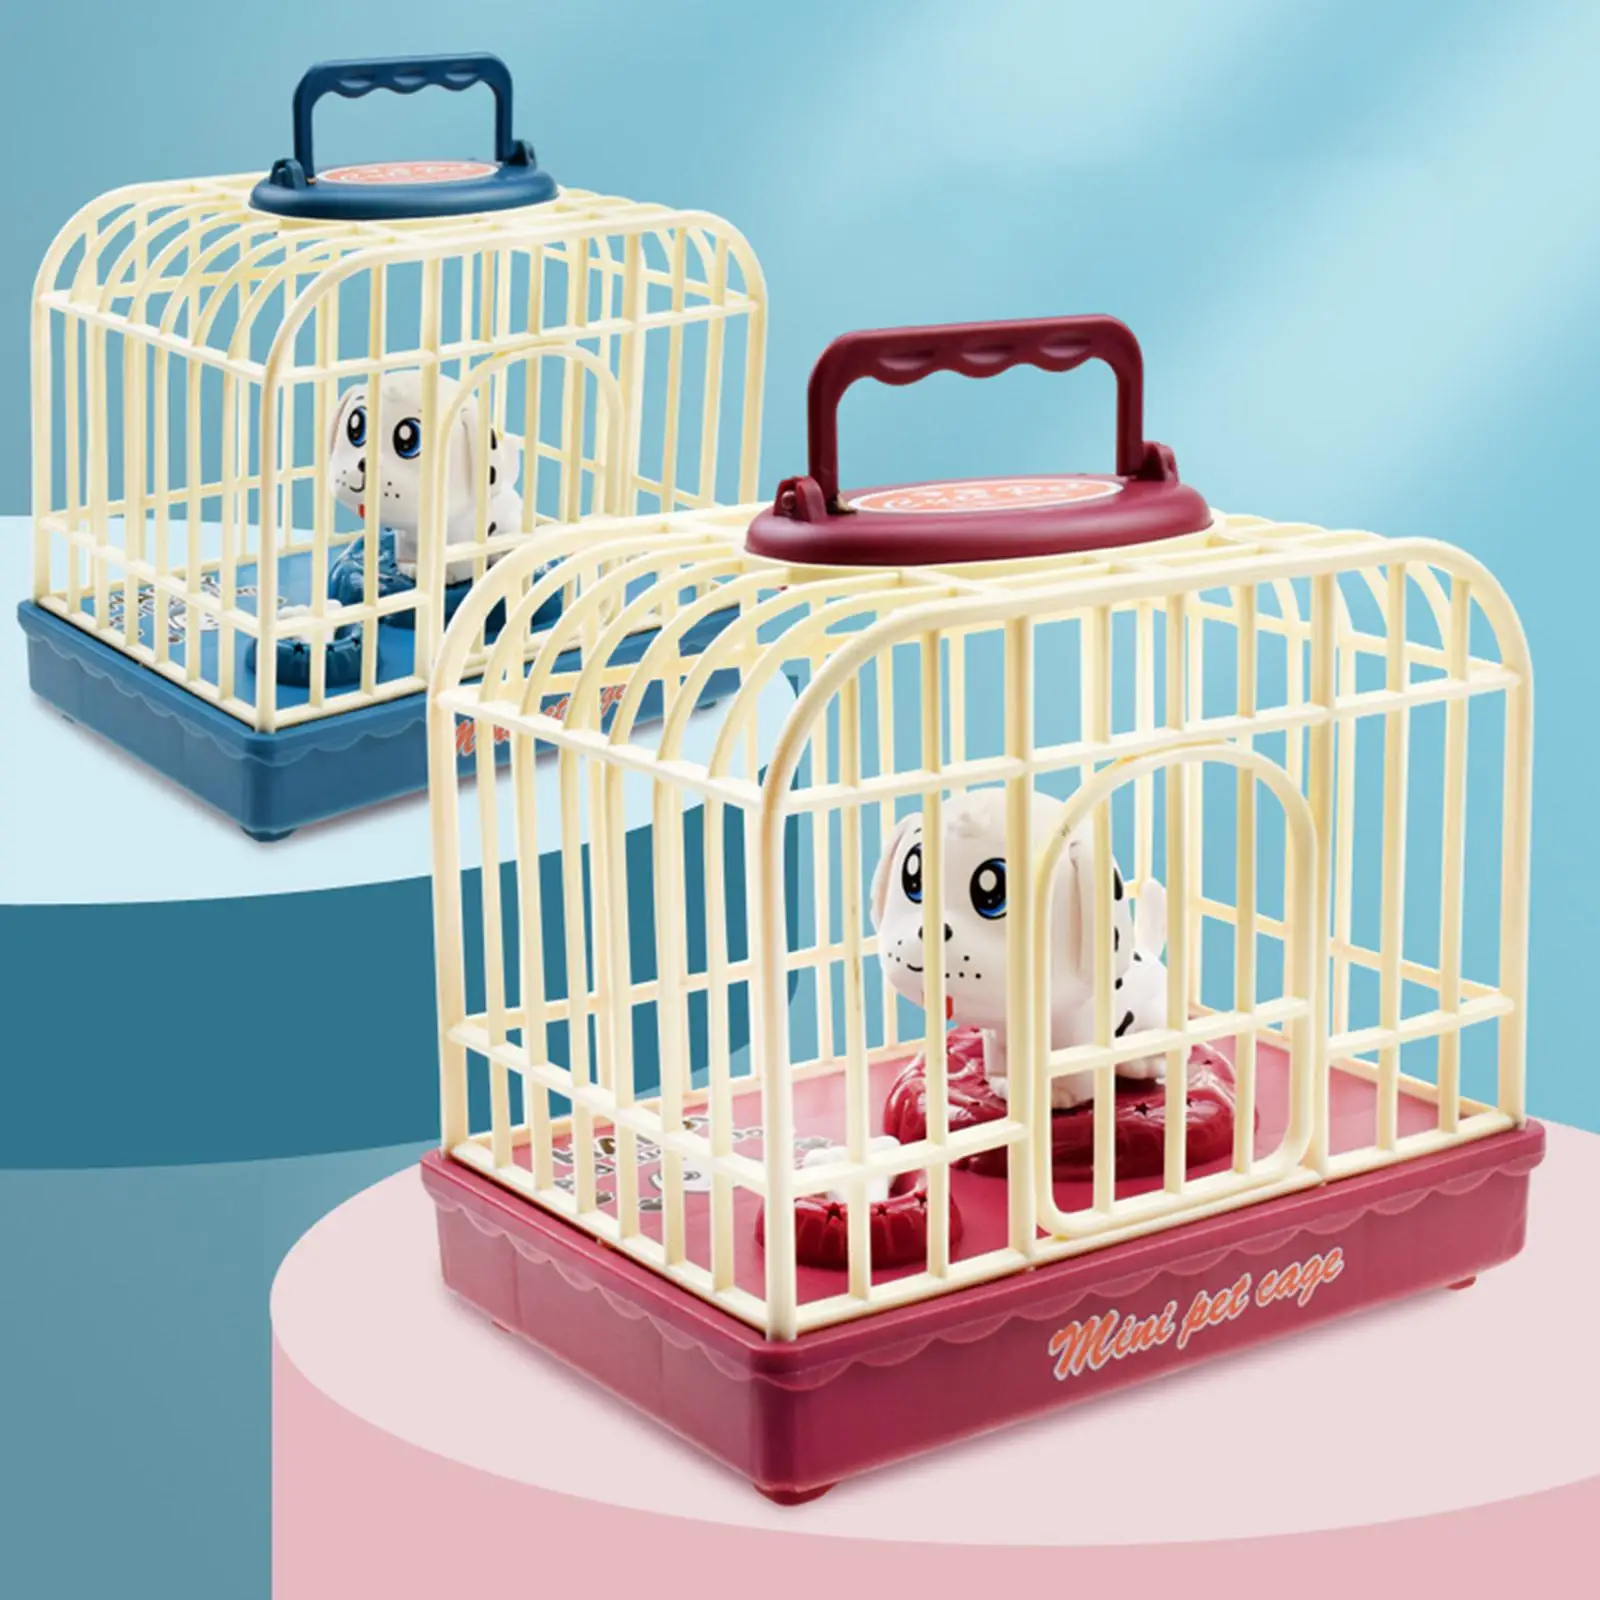 Dog Cage Toy Sound Control, Battery Powered for Toddler Child 6 Months and up Birthday Gifts